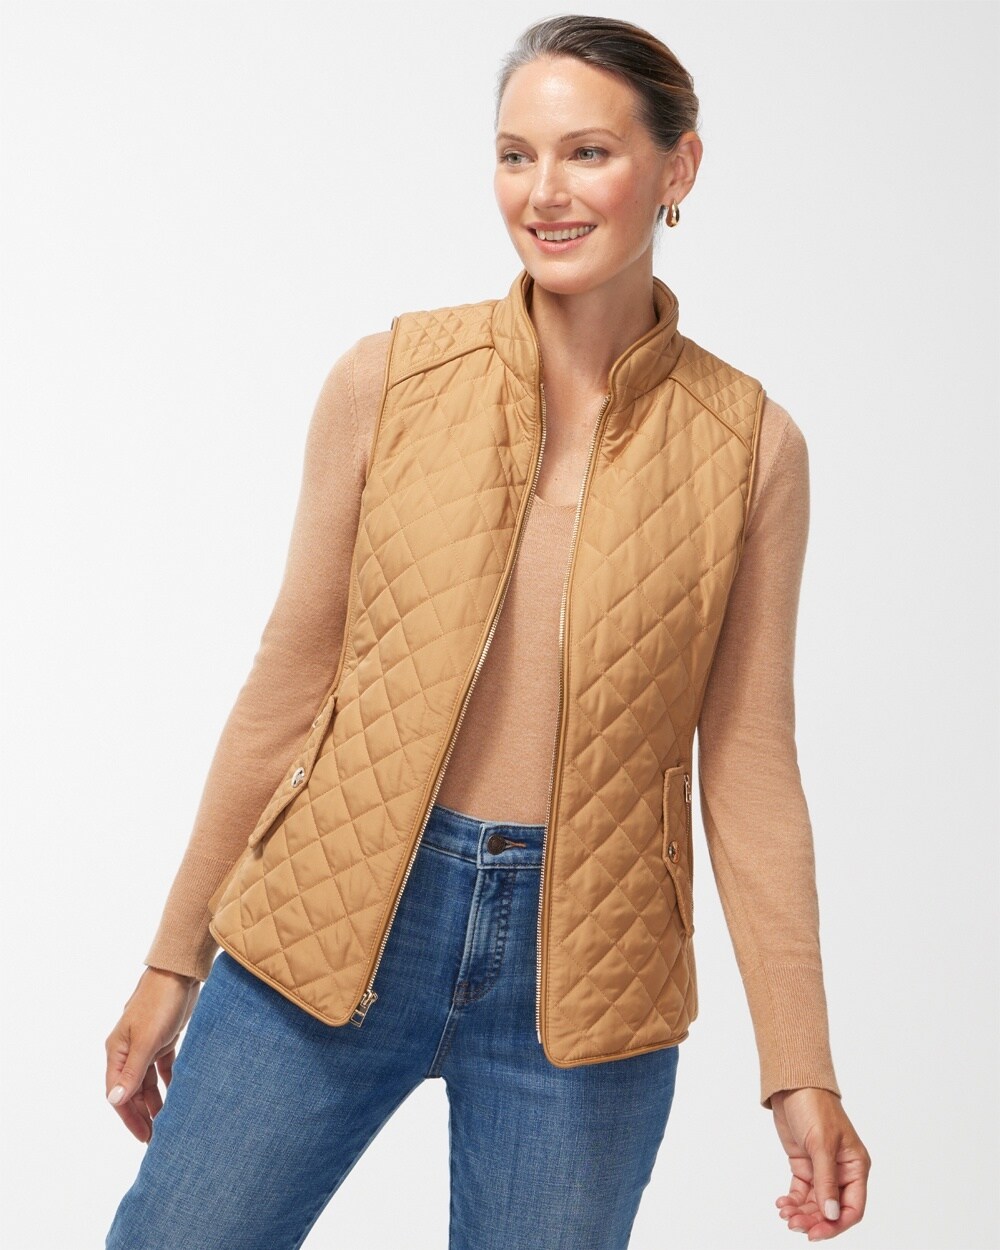 Rib Trim Quilted Vest video preview image, click to start video